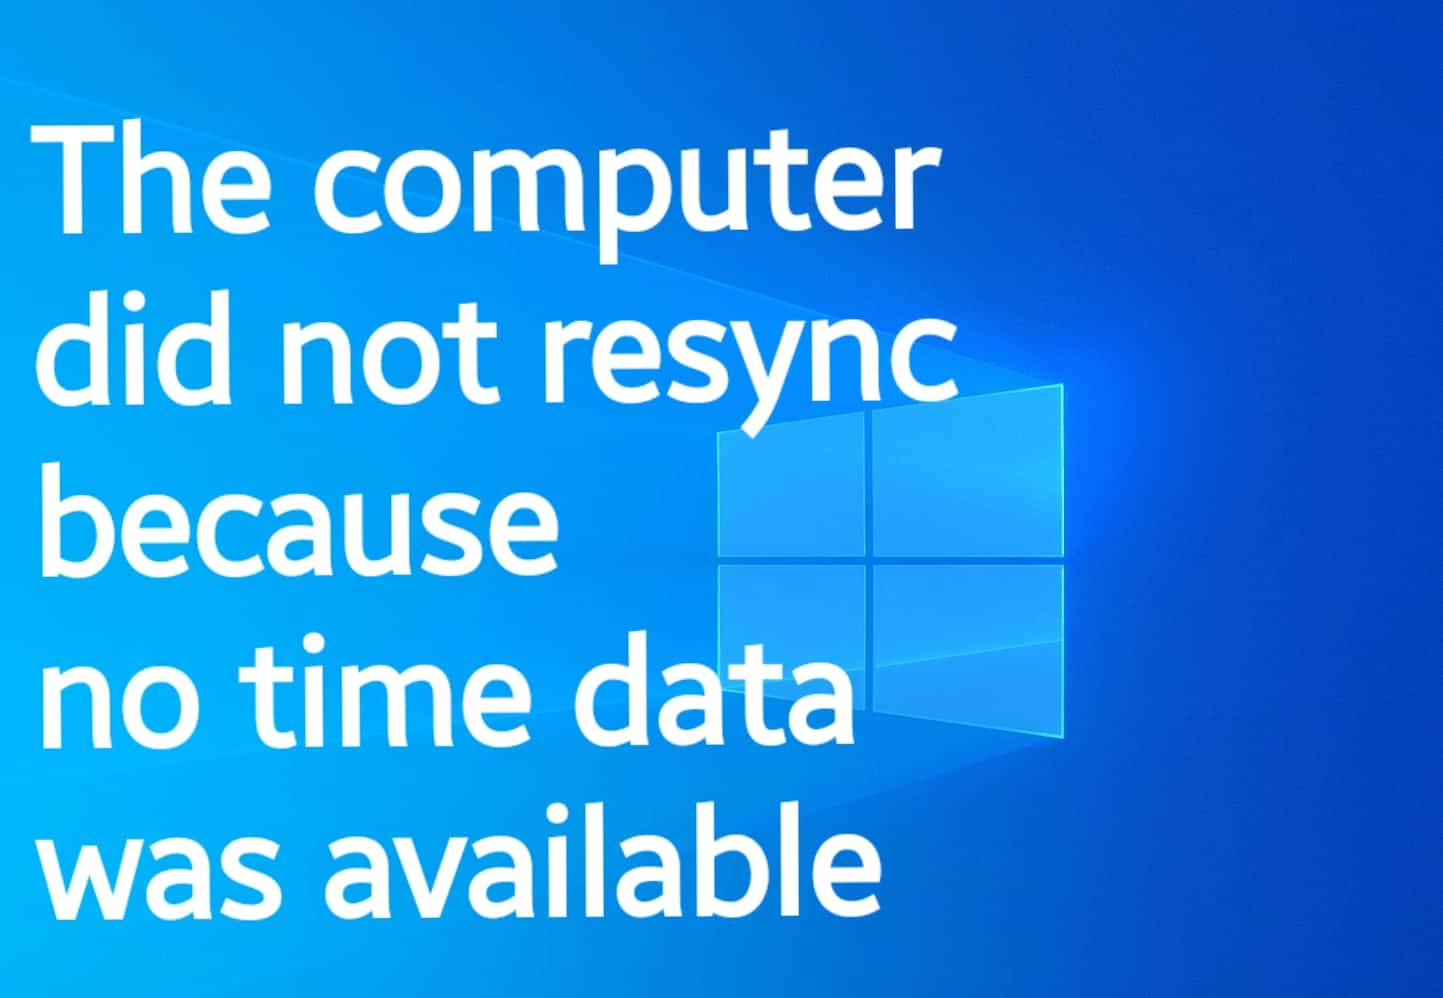 computer did resync because there was no time data available